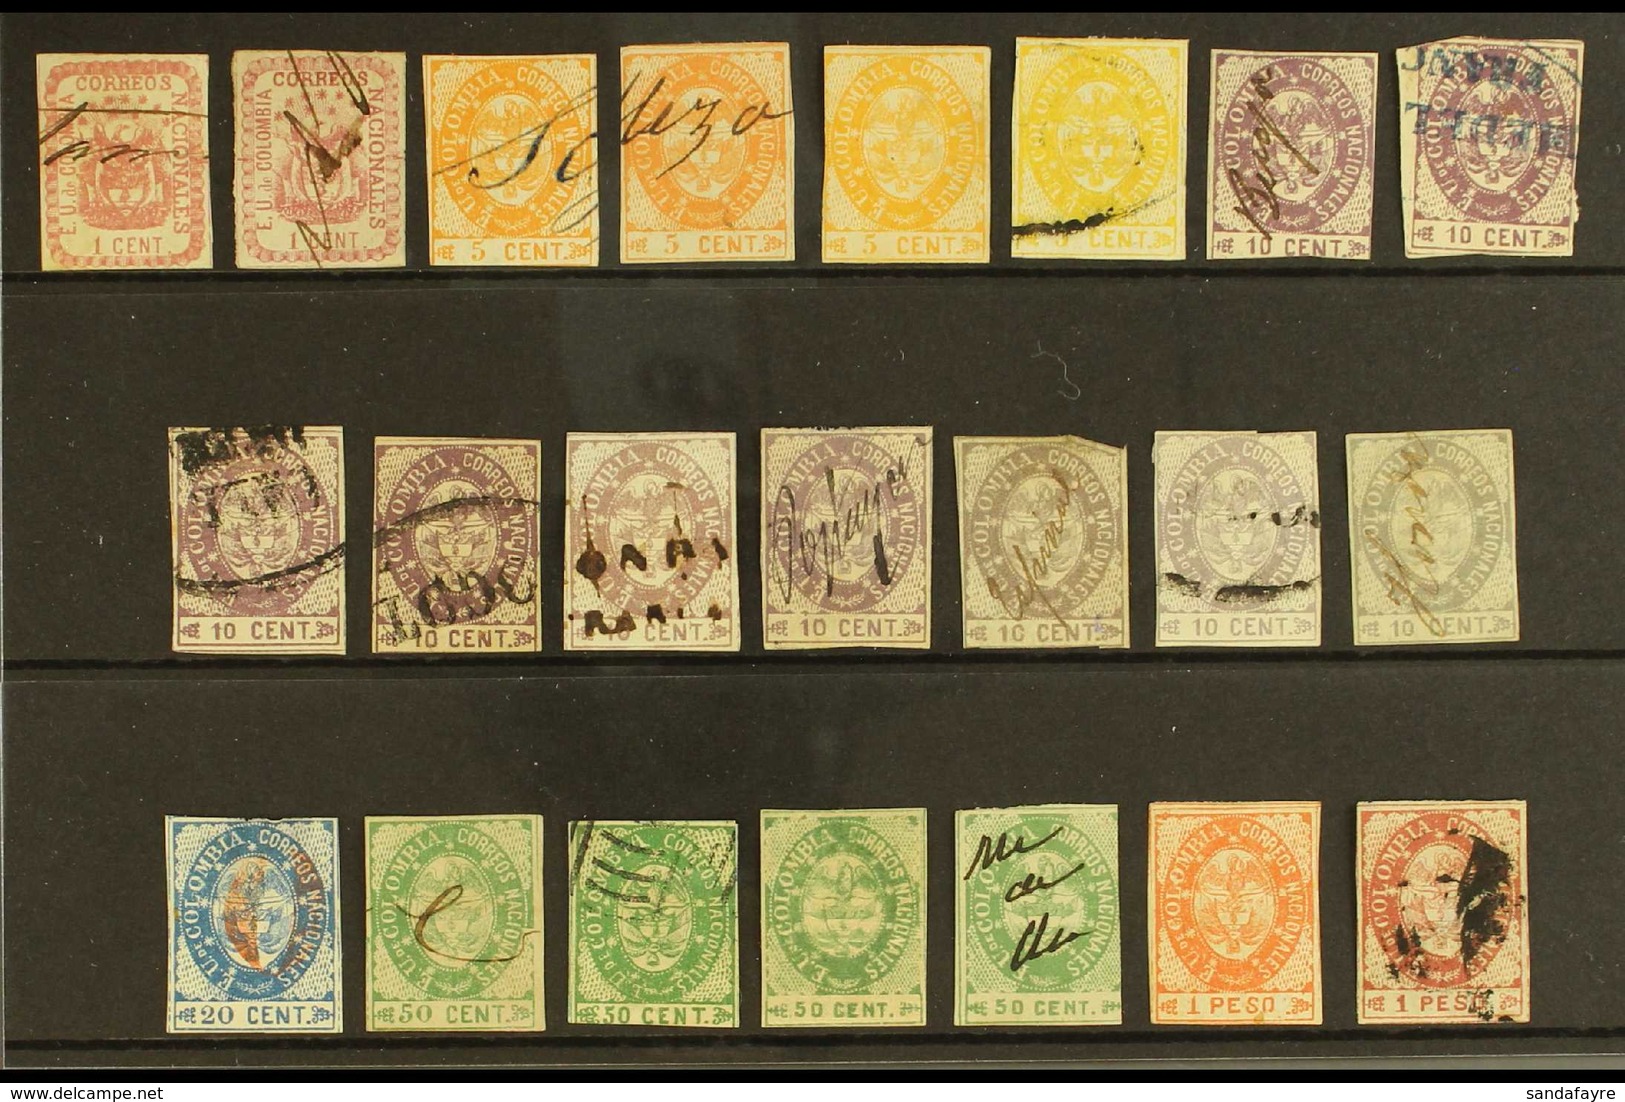 1865 IMPERF ISSUES Includes 1c Rose (two Shades) Used, 5c Orange X2 Used And One Unused, 5c Lemon Used, 10c Violet X6 Us - Colombia